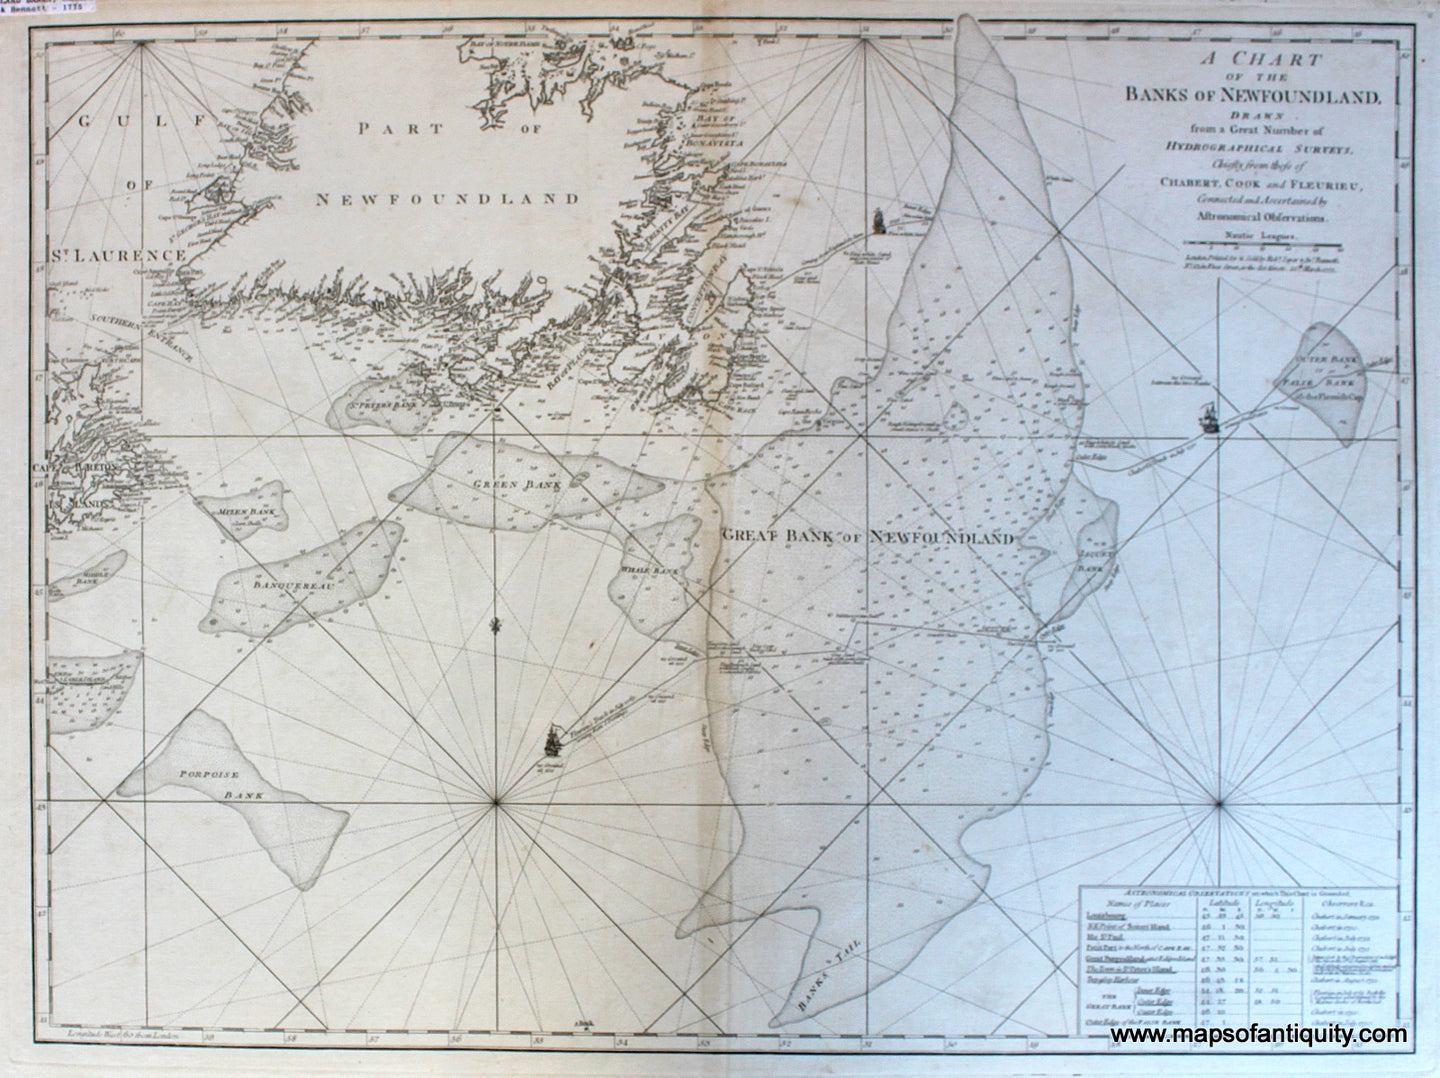 Black-and-White-Antique--Nautical-Chart-A-Chart-of-the-Banks-of-Newfoundland-drawn-from-a-Great-Number-of-Hydrographical-Surveys-Chiefly-from-those-of-Chabert-Cook-and-Fleurieu**********-North-America-Canada-1775-Thomas-Jefferys-Sayer-and-Bennett-Maps-Of-Antiquity